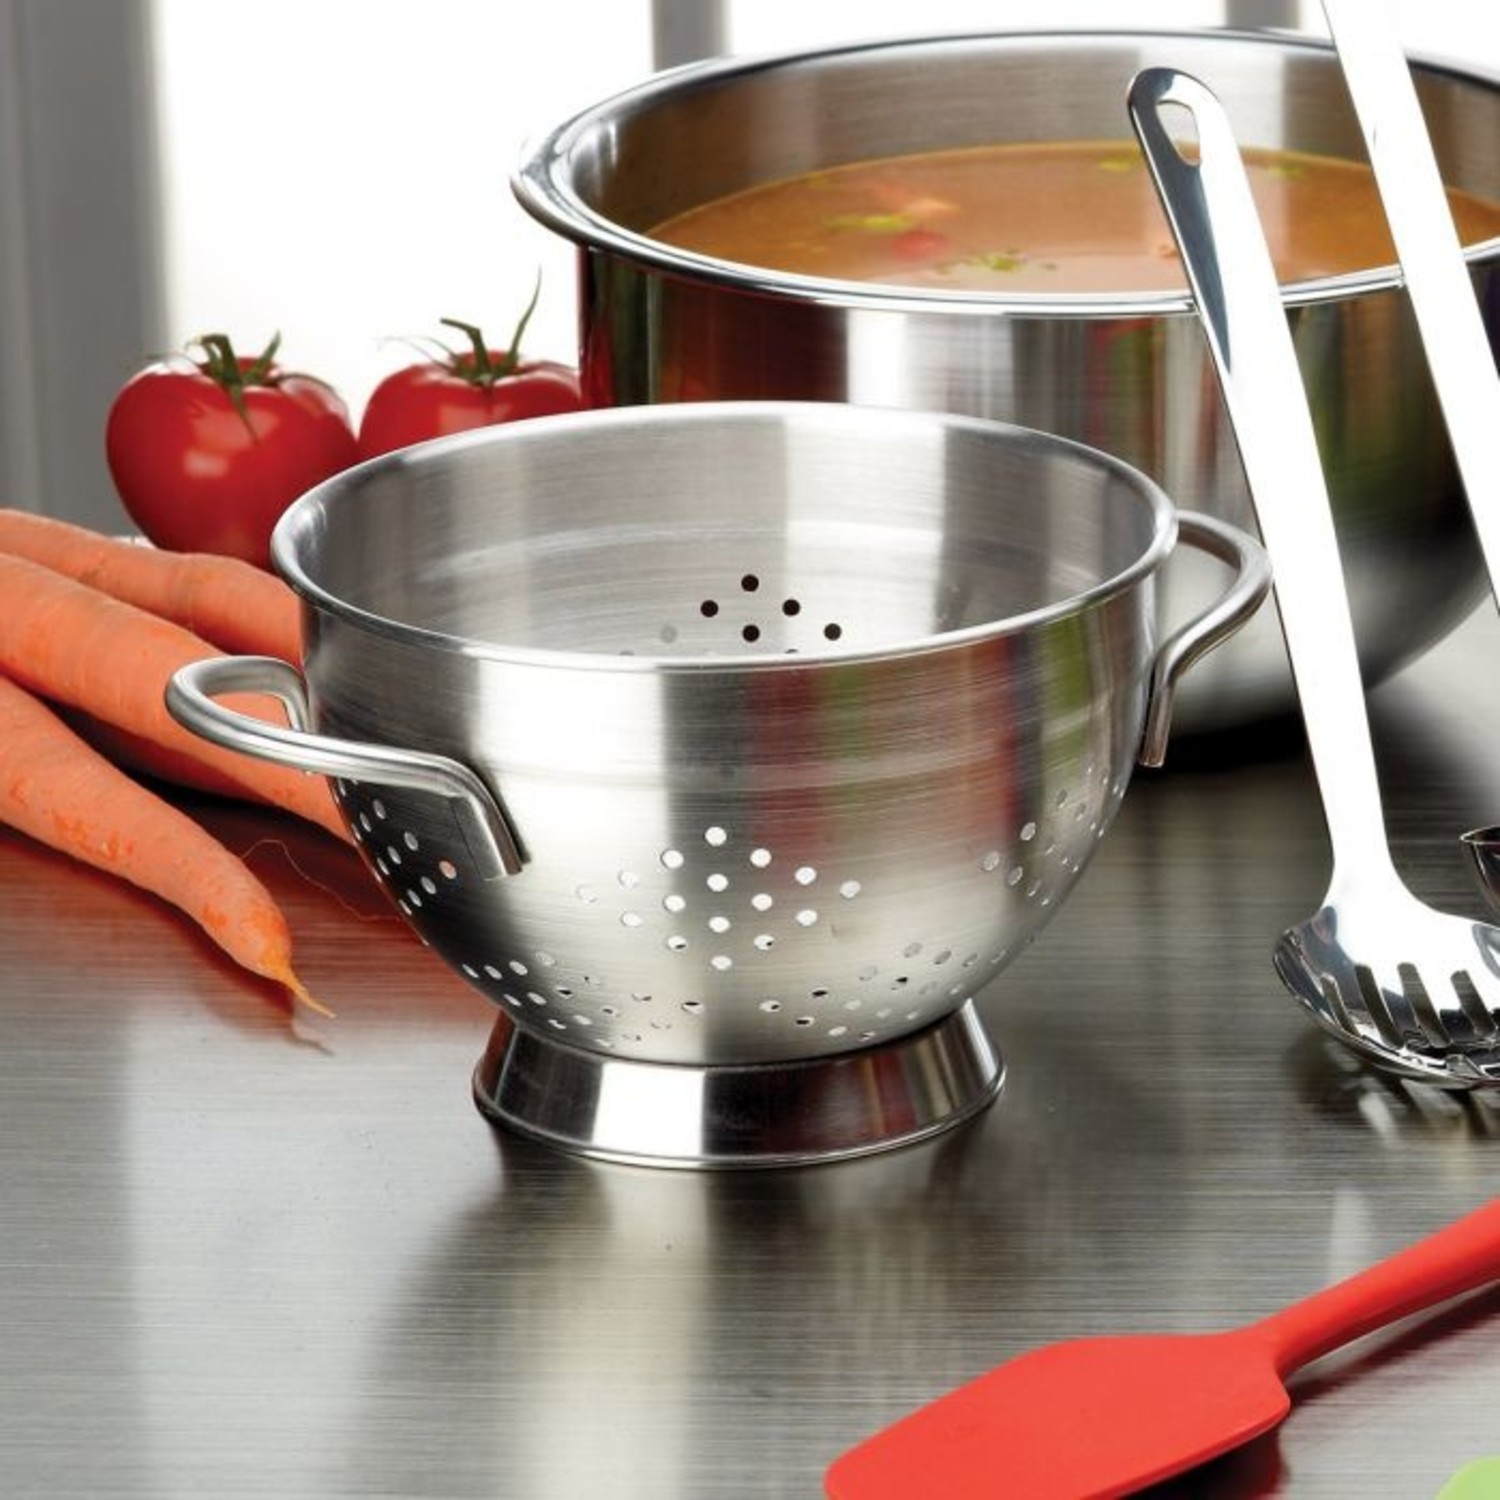 New OXO Good Grips Stainless Steel Colander Stainer Set - 5 Quart and 3  Quart